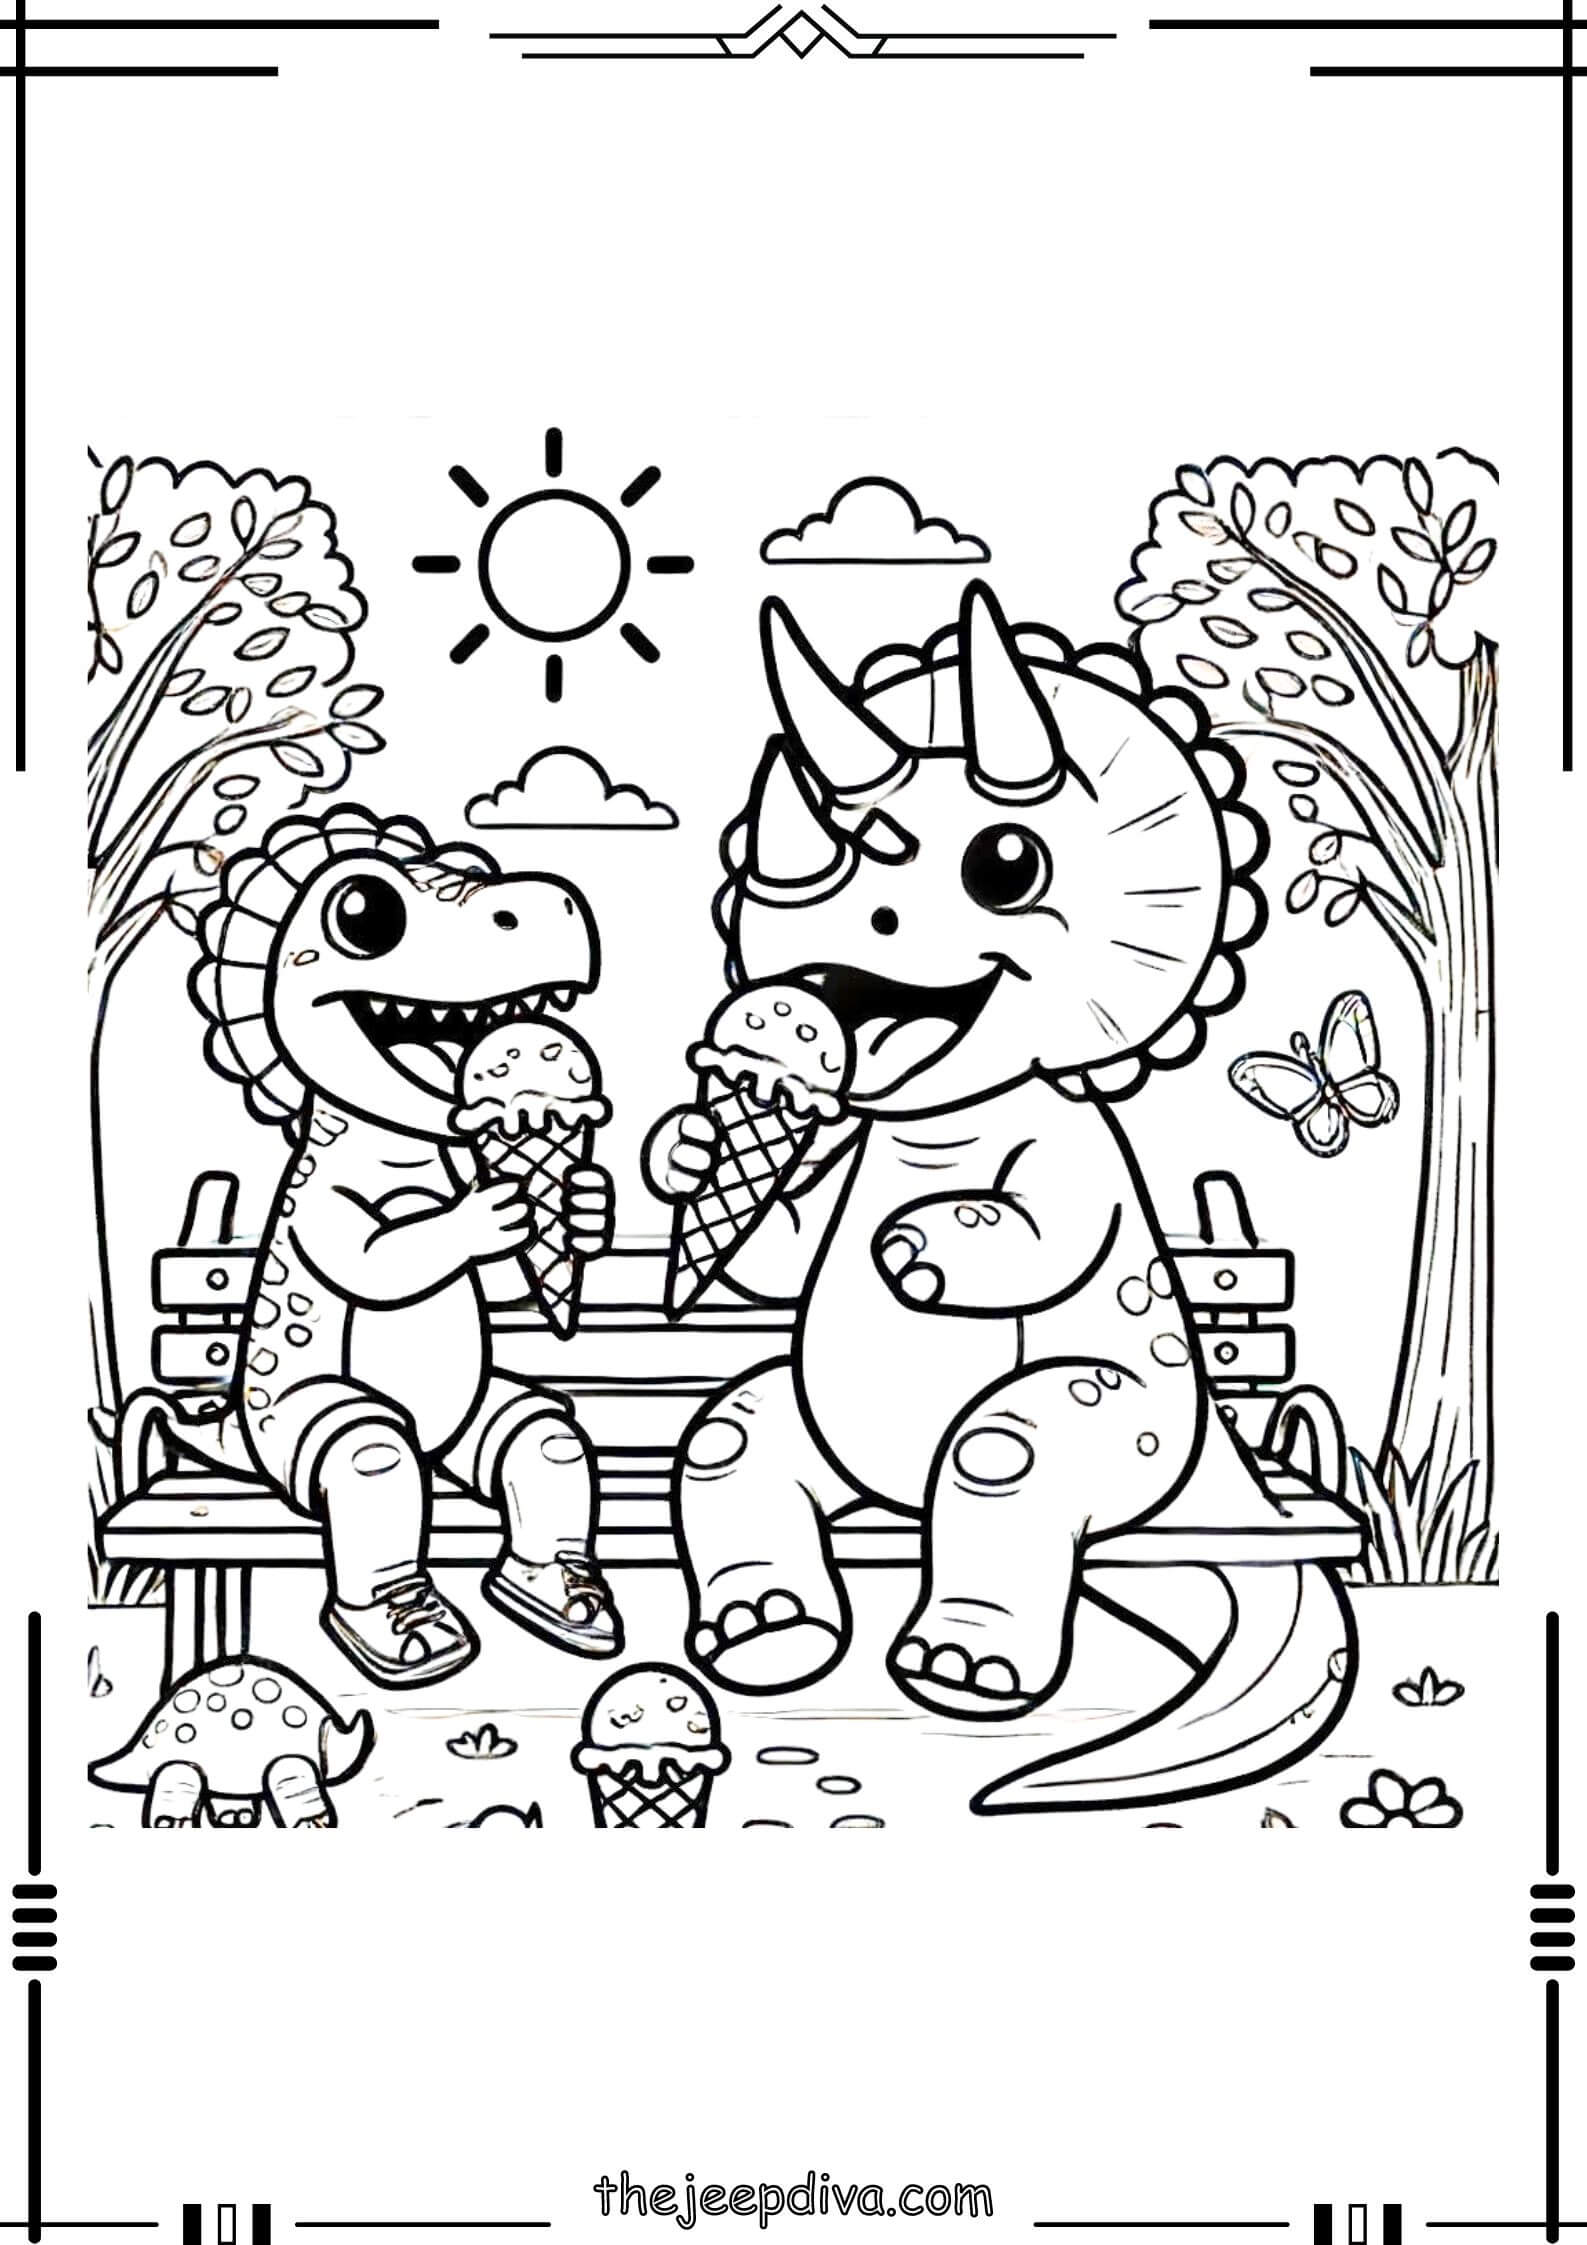 Dinosaur-Colouring-Pages-Hard-17